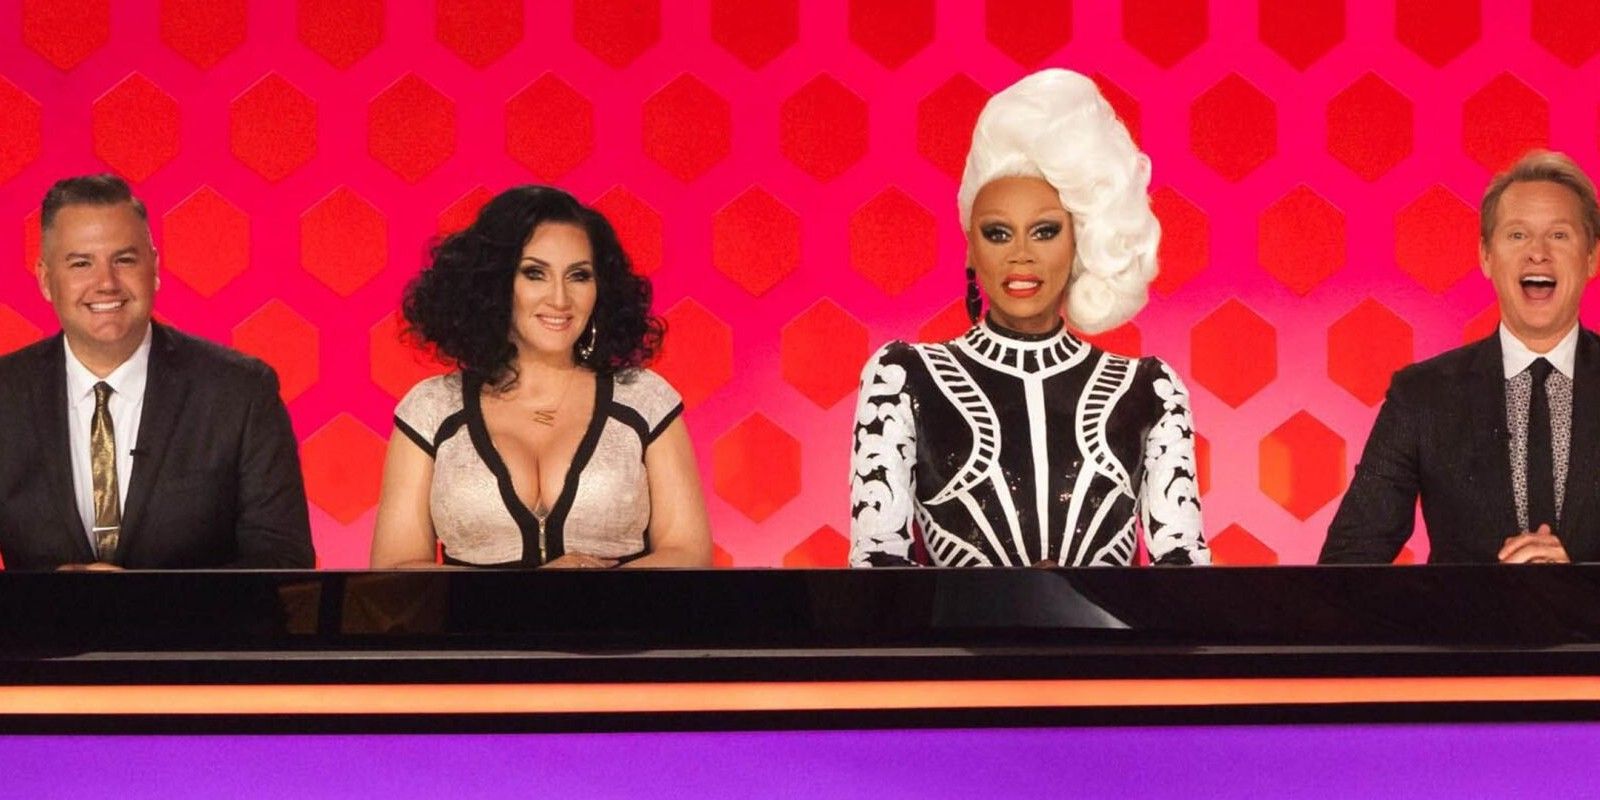 The judges sitting on the judges' panel in RuPaul's Drag Race.